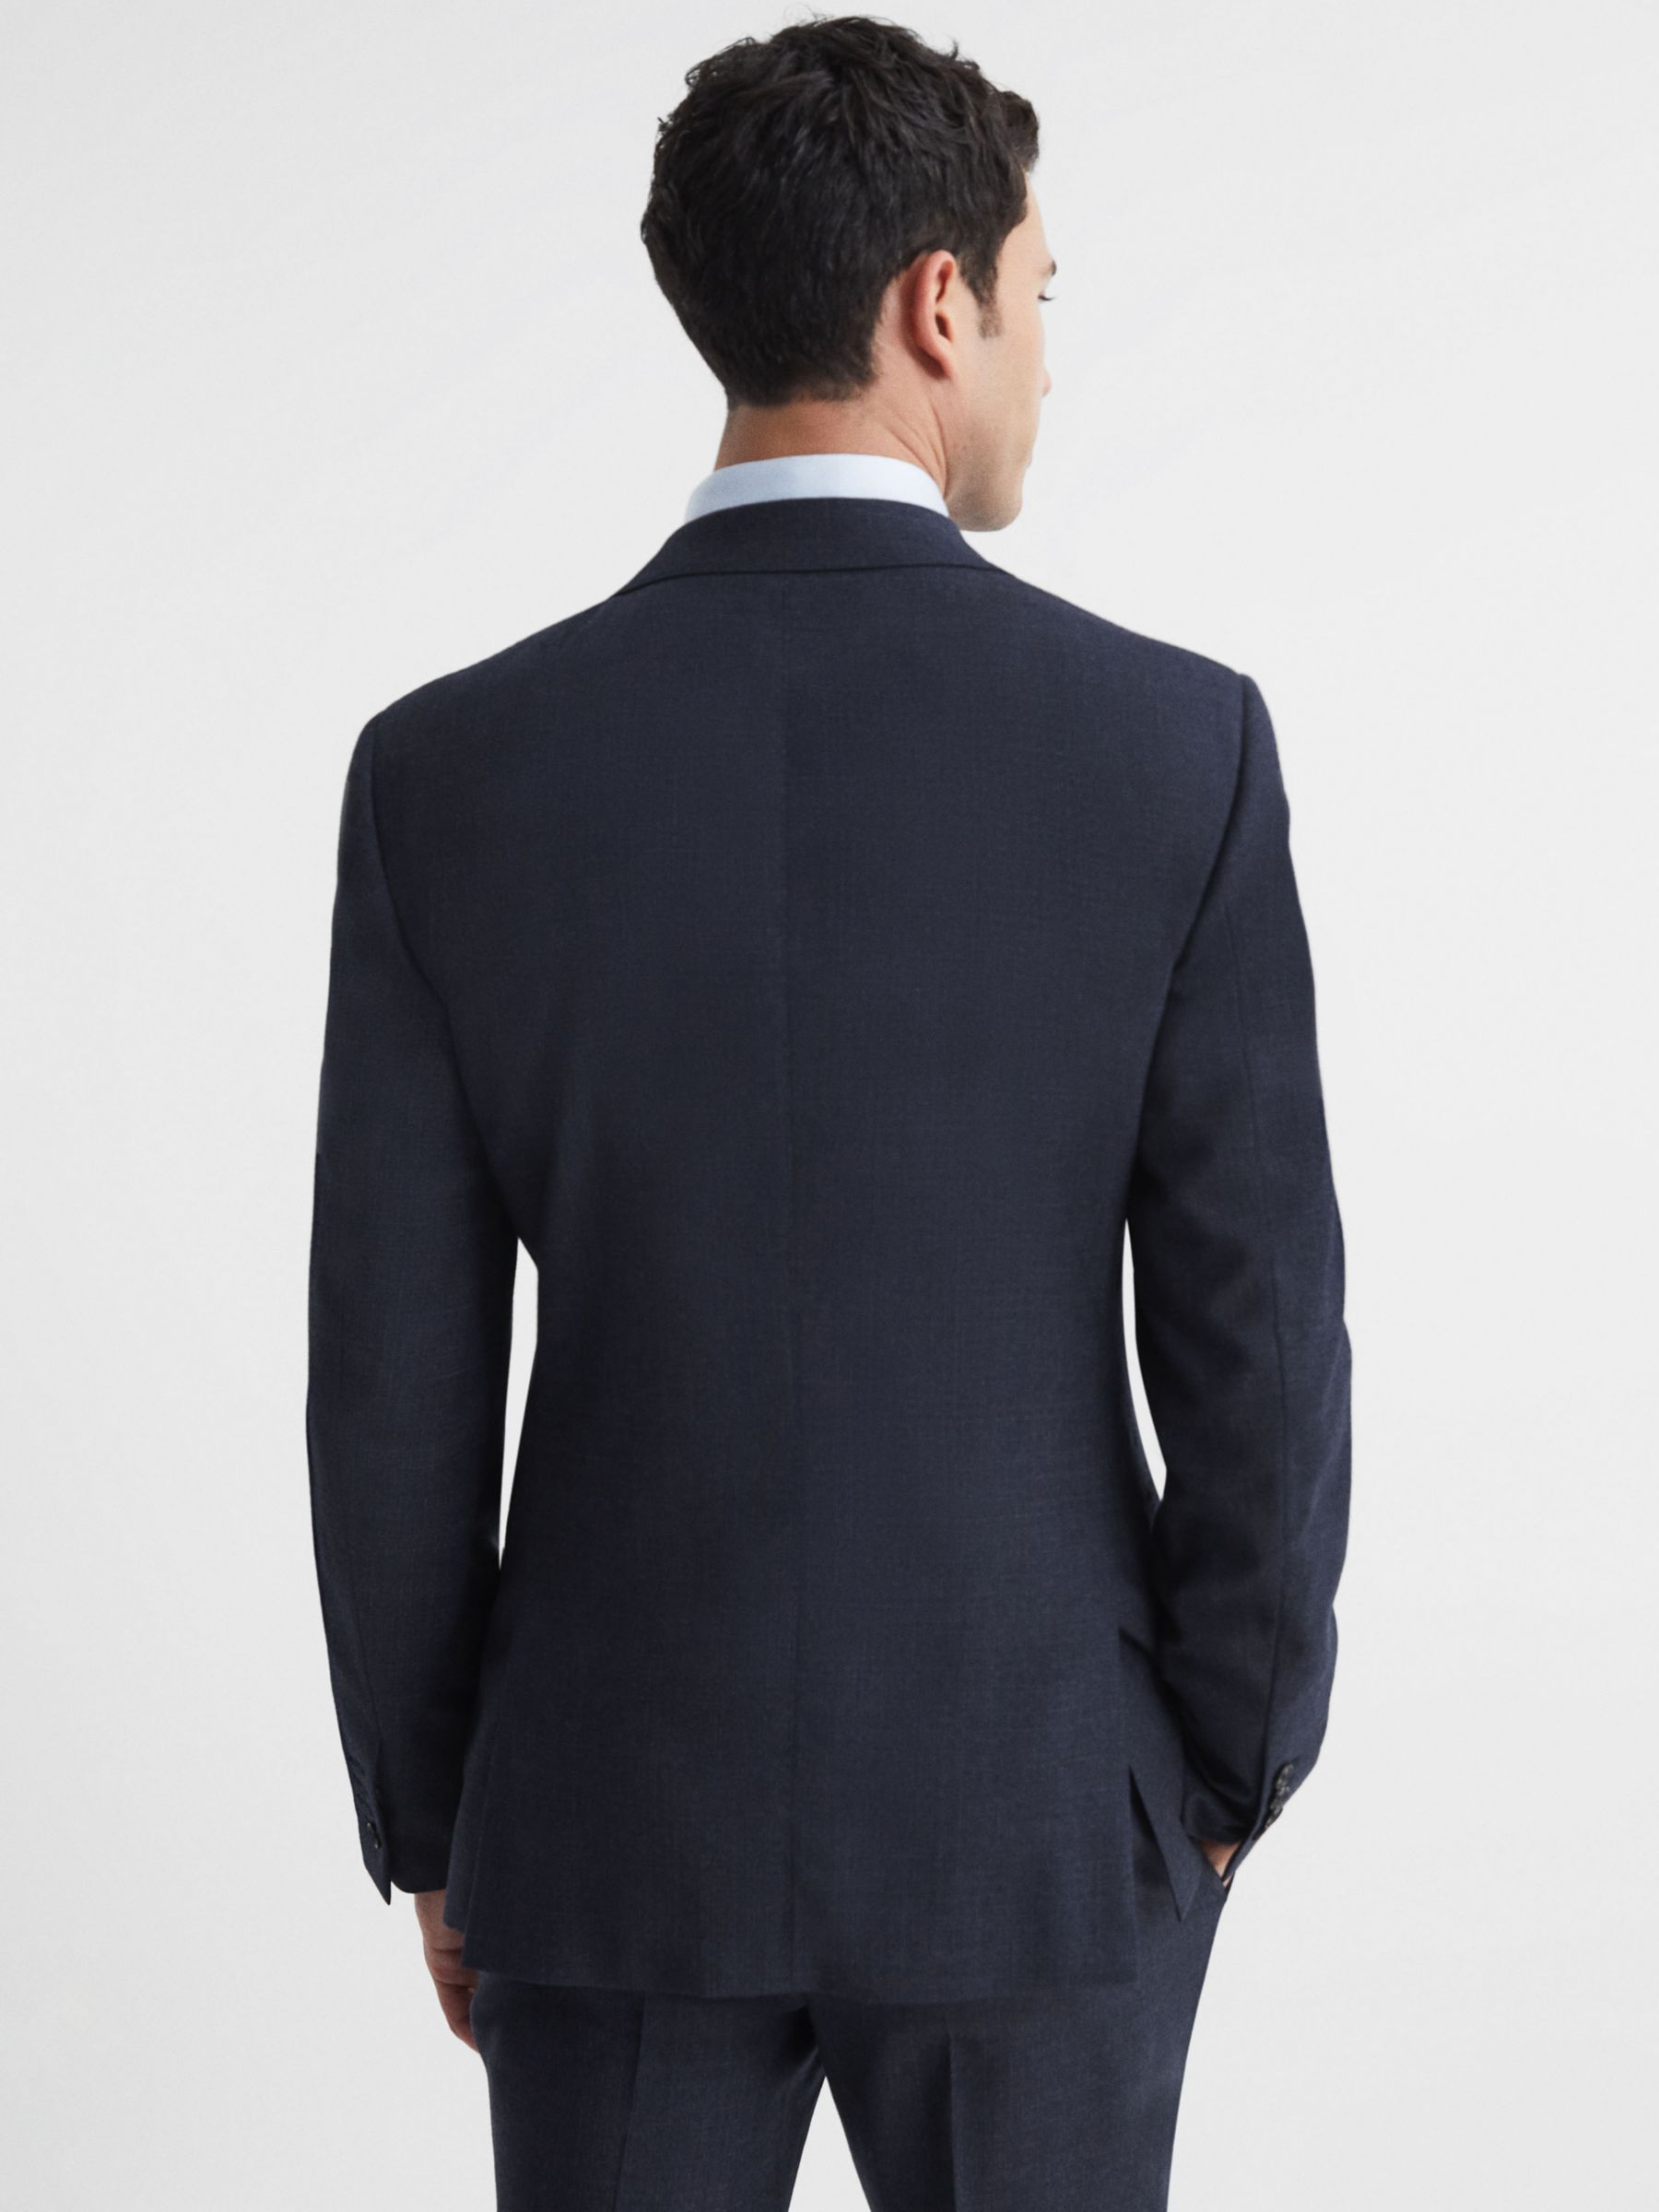 Reiss Dunn Textured Wool Tailored Fit Suit Jacket, Navy, 36